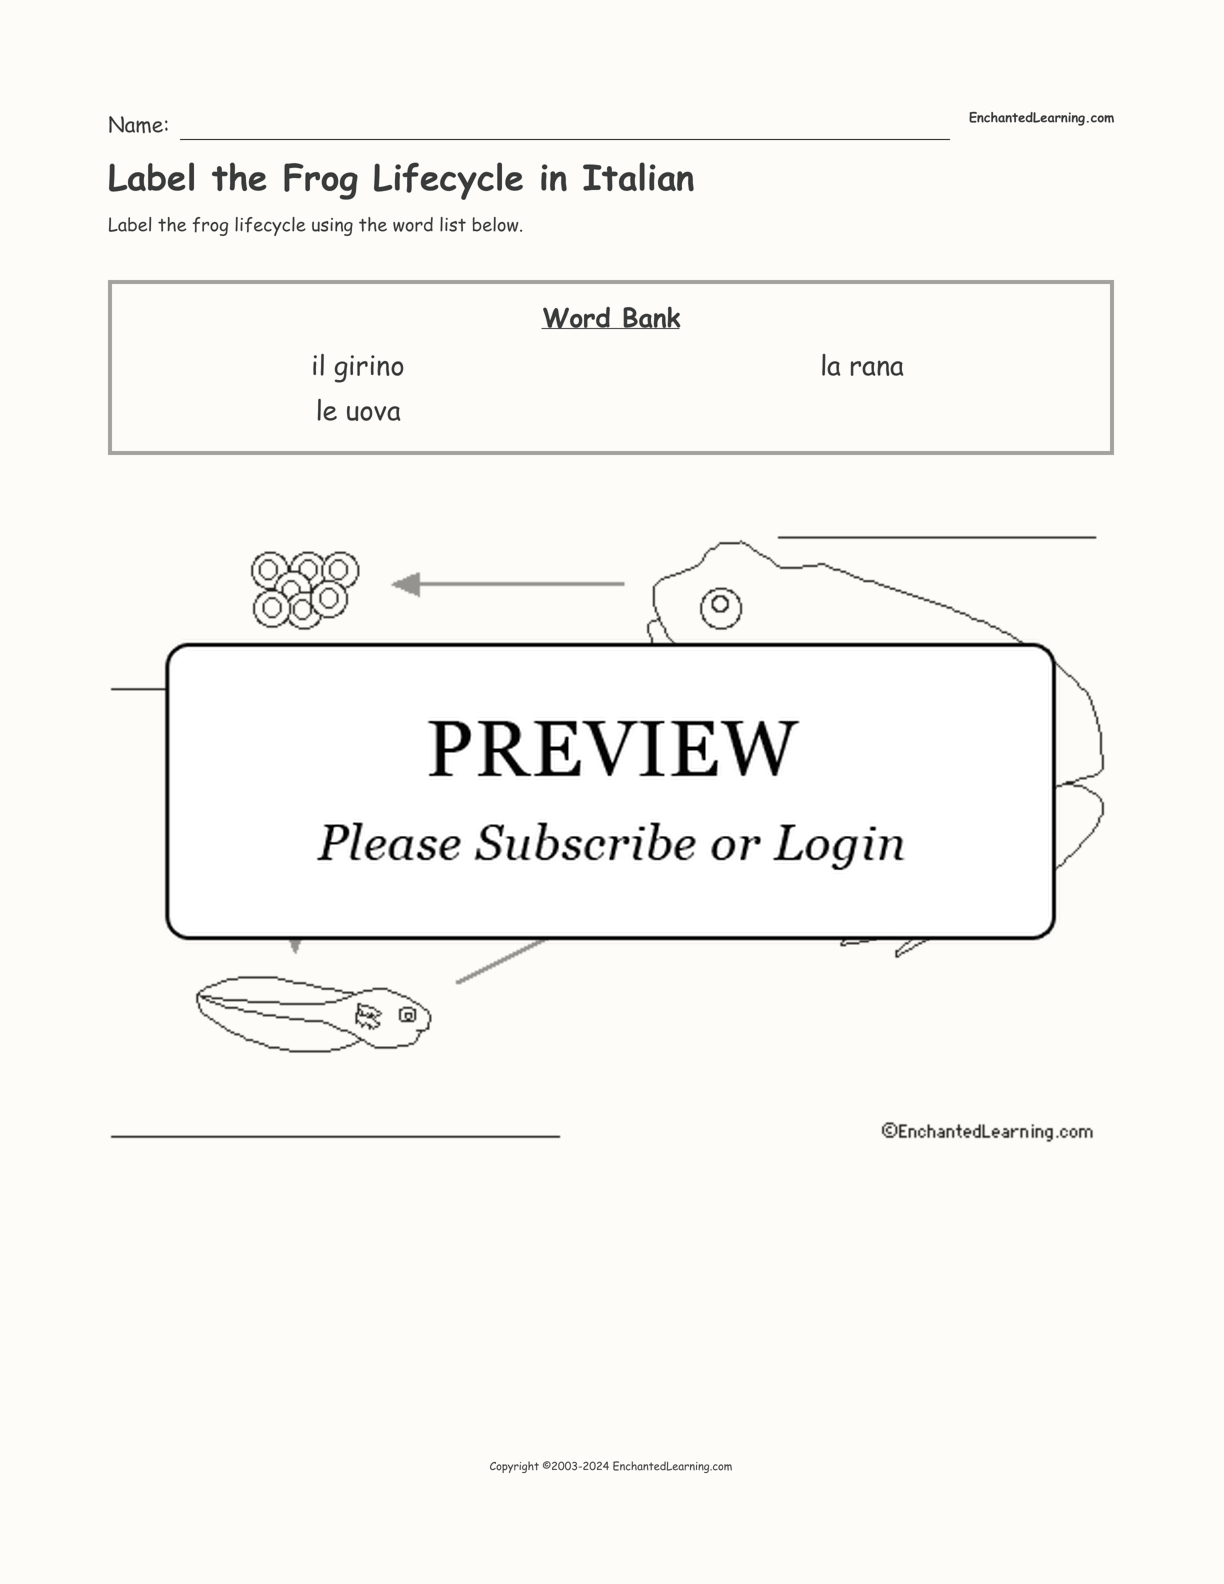 Label the Frog Lifecycle in Italian interactive worksheet page 1